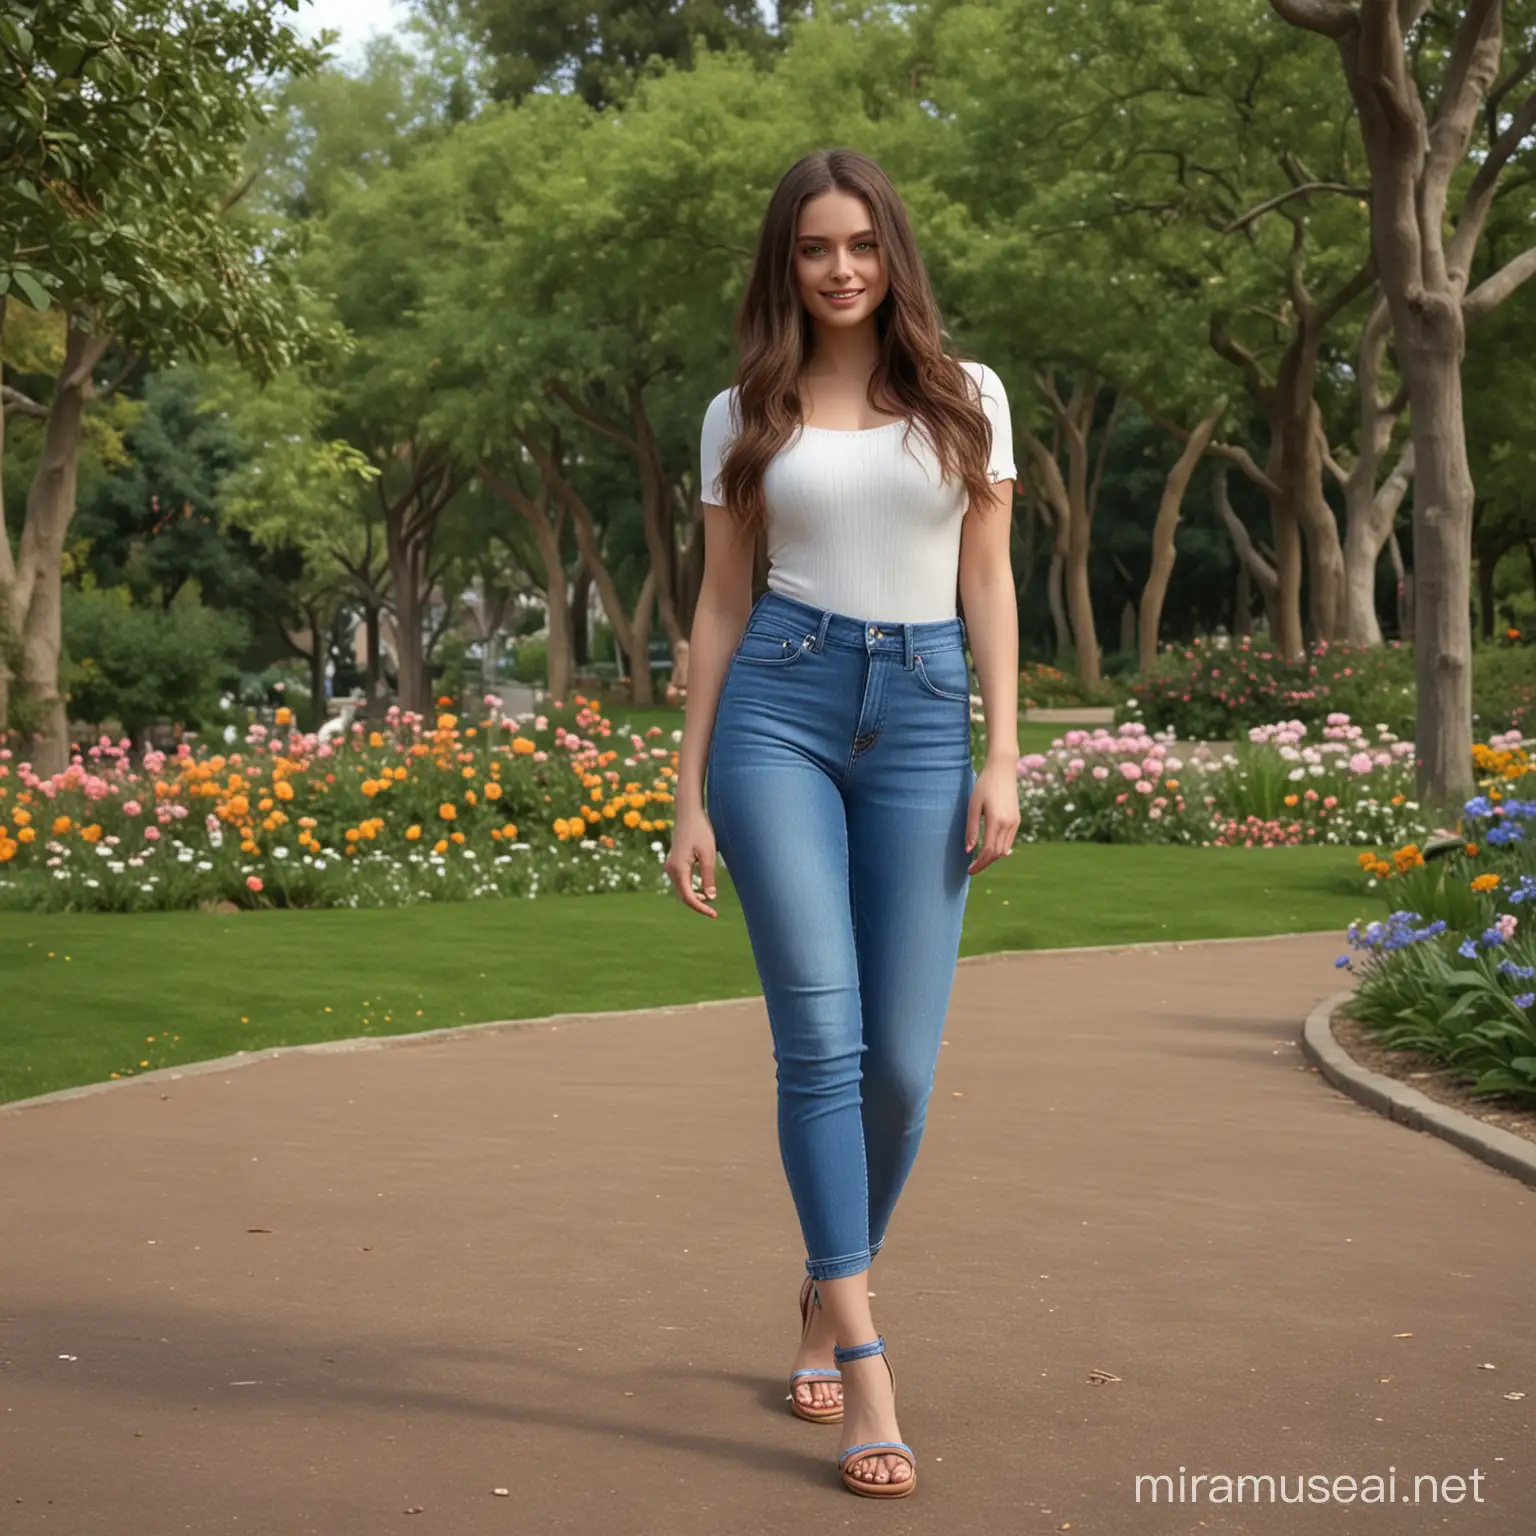 Glamorous Brunette Strolling in the Park with Alluring Denim Outfit